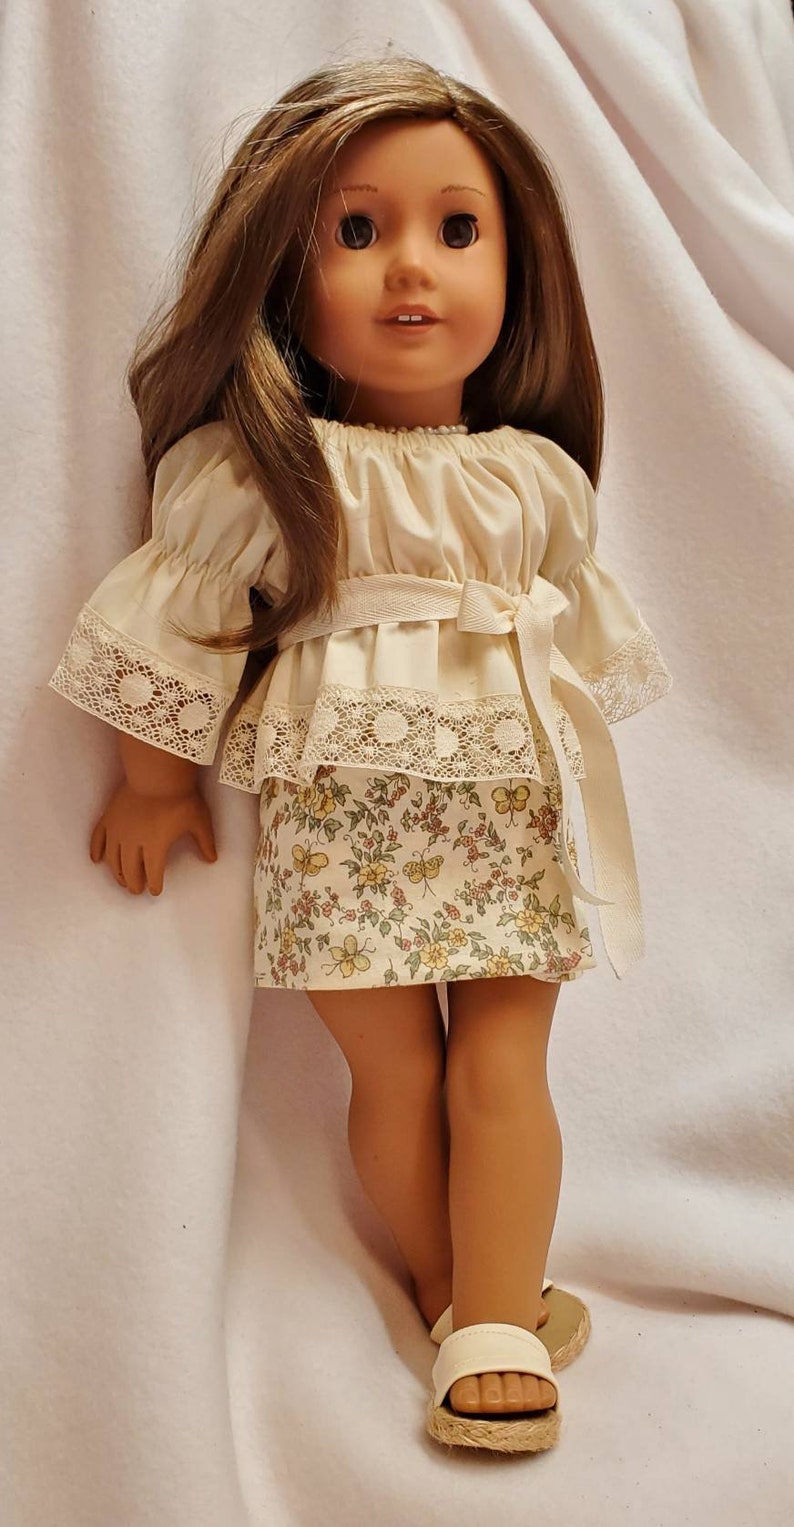 Handmade to fit 18 inch Dolls c Angel in a Meadow doll clothes trendy outfit Skirt, Top, Shoes or separates PinkStarDollClothes image 2